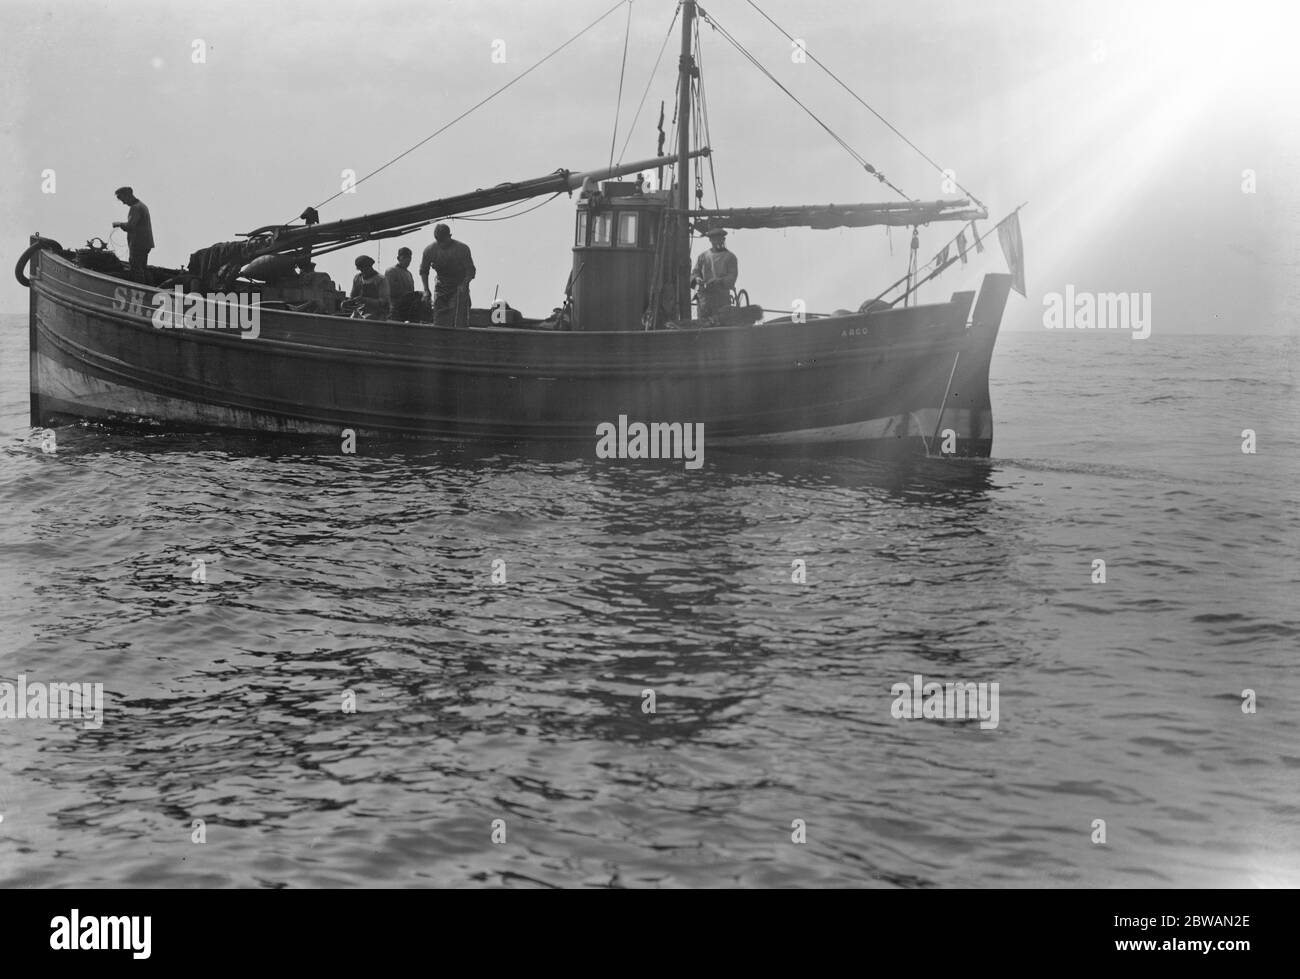 Line fishing boat Black and White Stock Photos & Images - Alamy